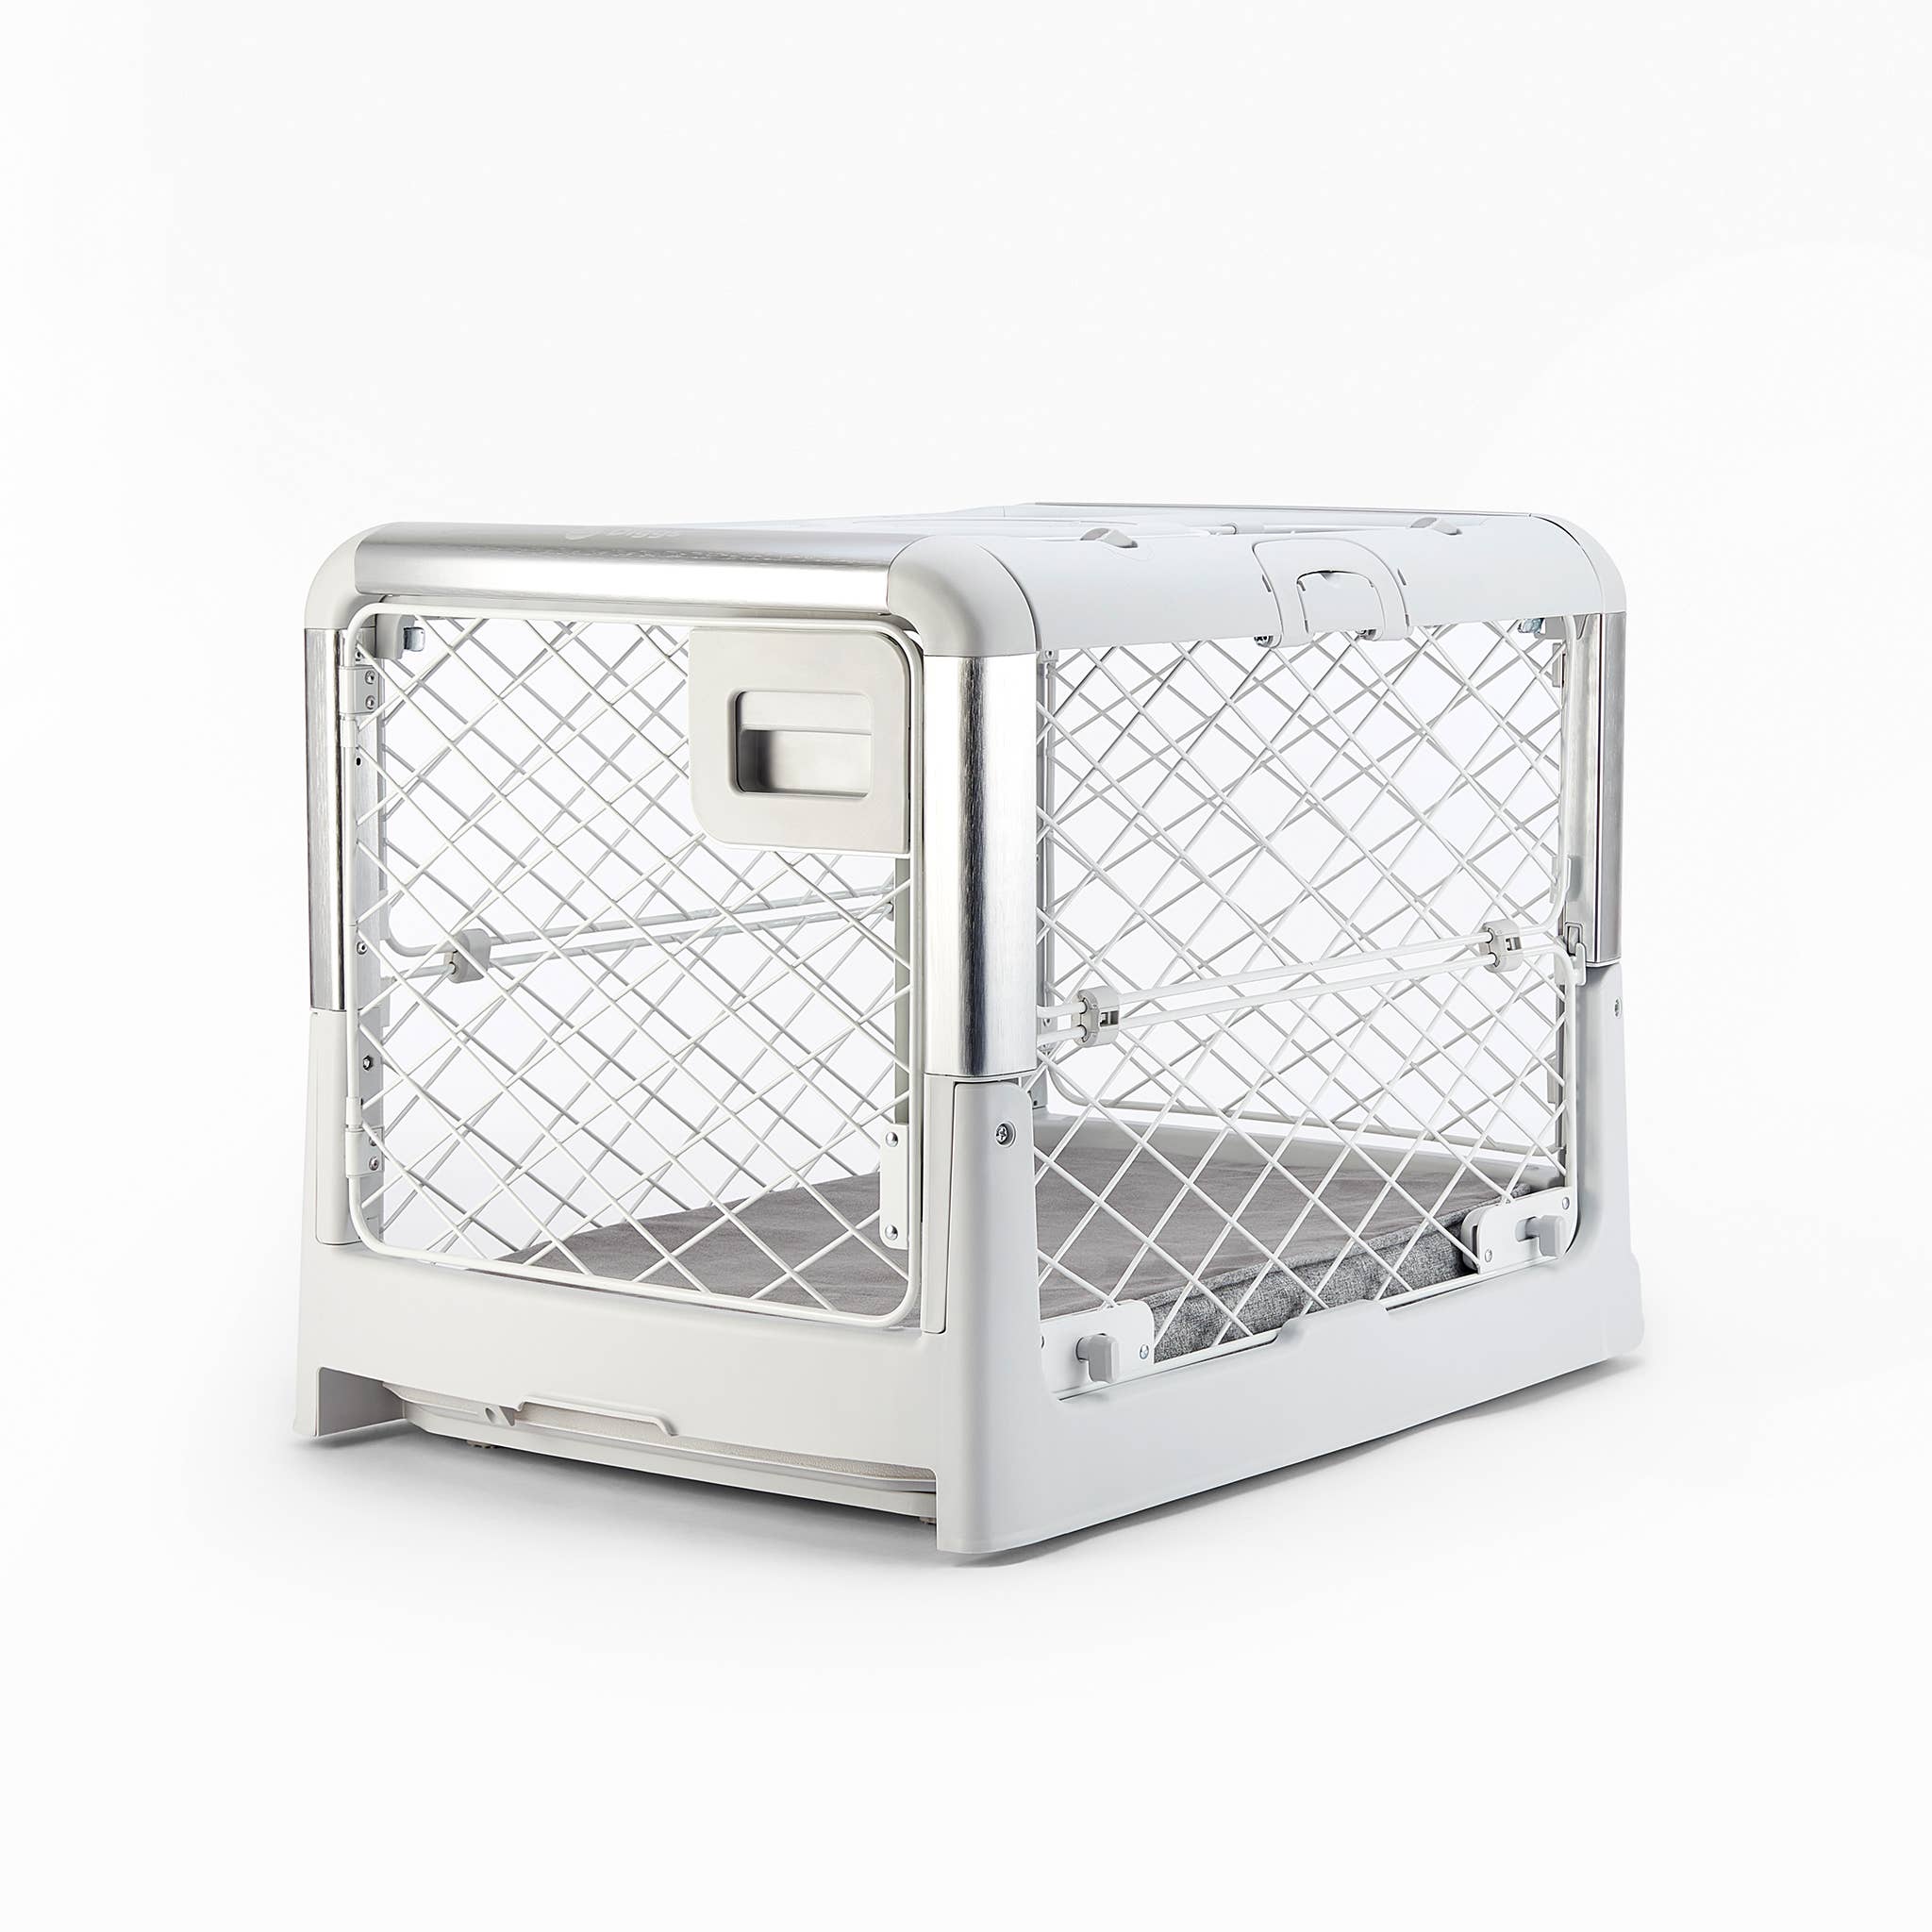 Groov Dog Crate Training Aid, Calming Toy Diggs